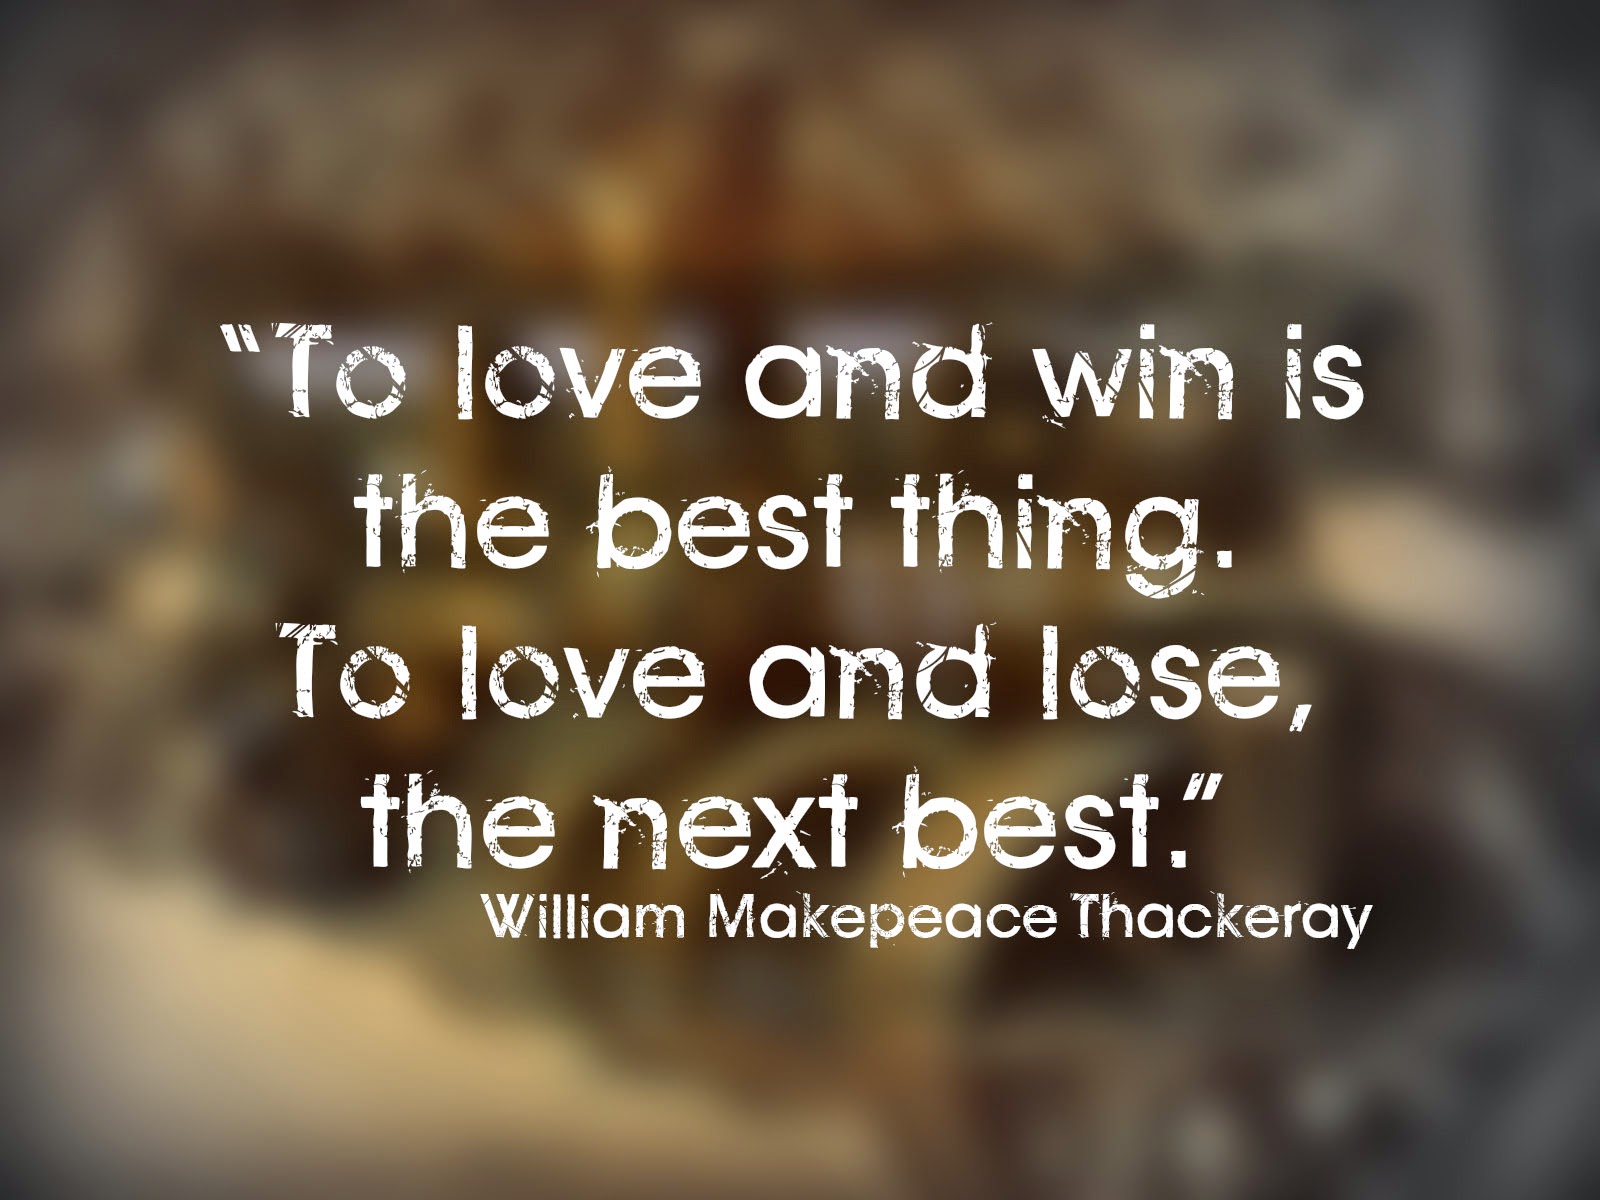 “To love and win is the best thing To love and lose the next best ”